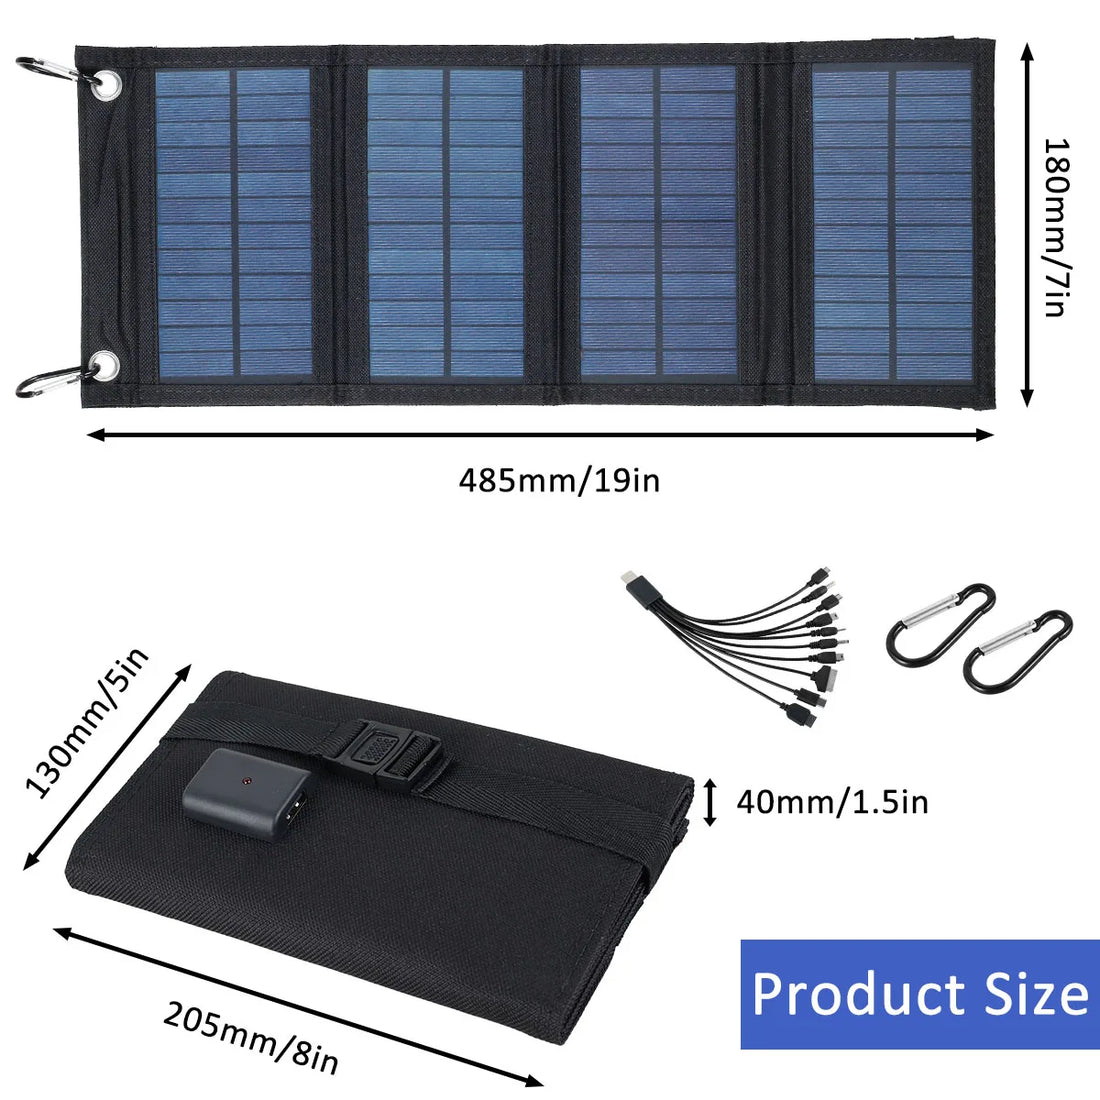  Folding Solar Panel Charger for Outdoor IP65 Waterproof USB Solar Power Charger Portable Lightweight 100W Power Phone Charger #